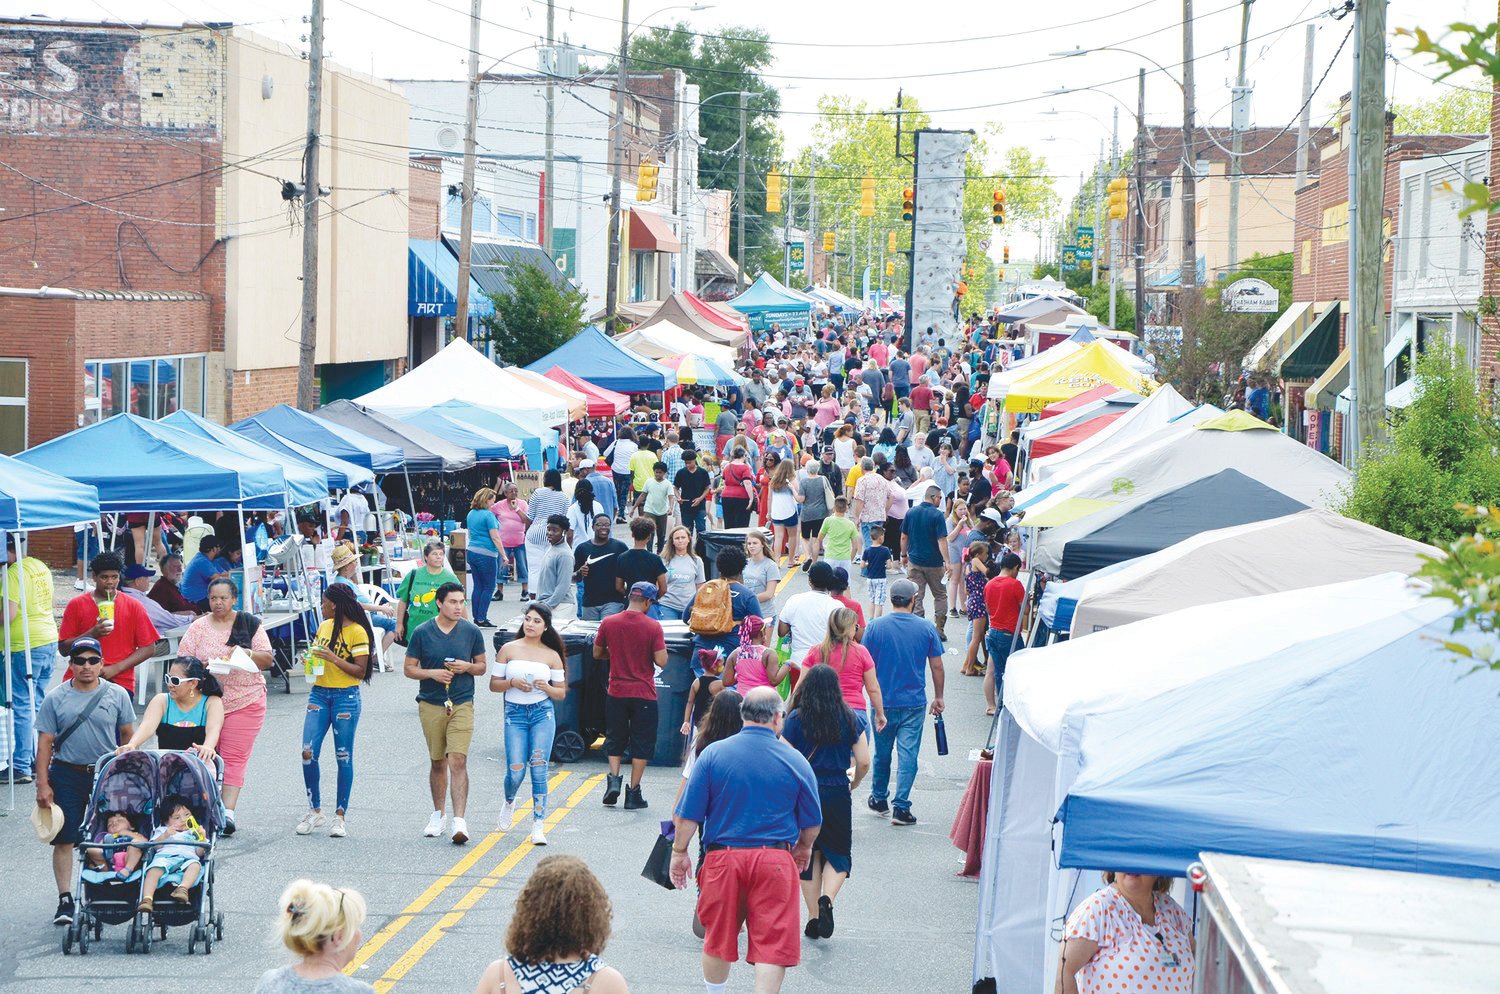 2019's Spring Chicken Festival, pictured here, drew 5,000 attendees. After two years of COVID-related cancelations, the 2022 festival is set for Saturday.